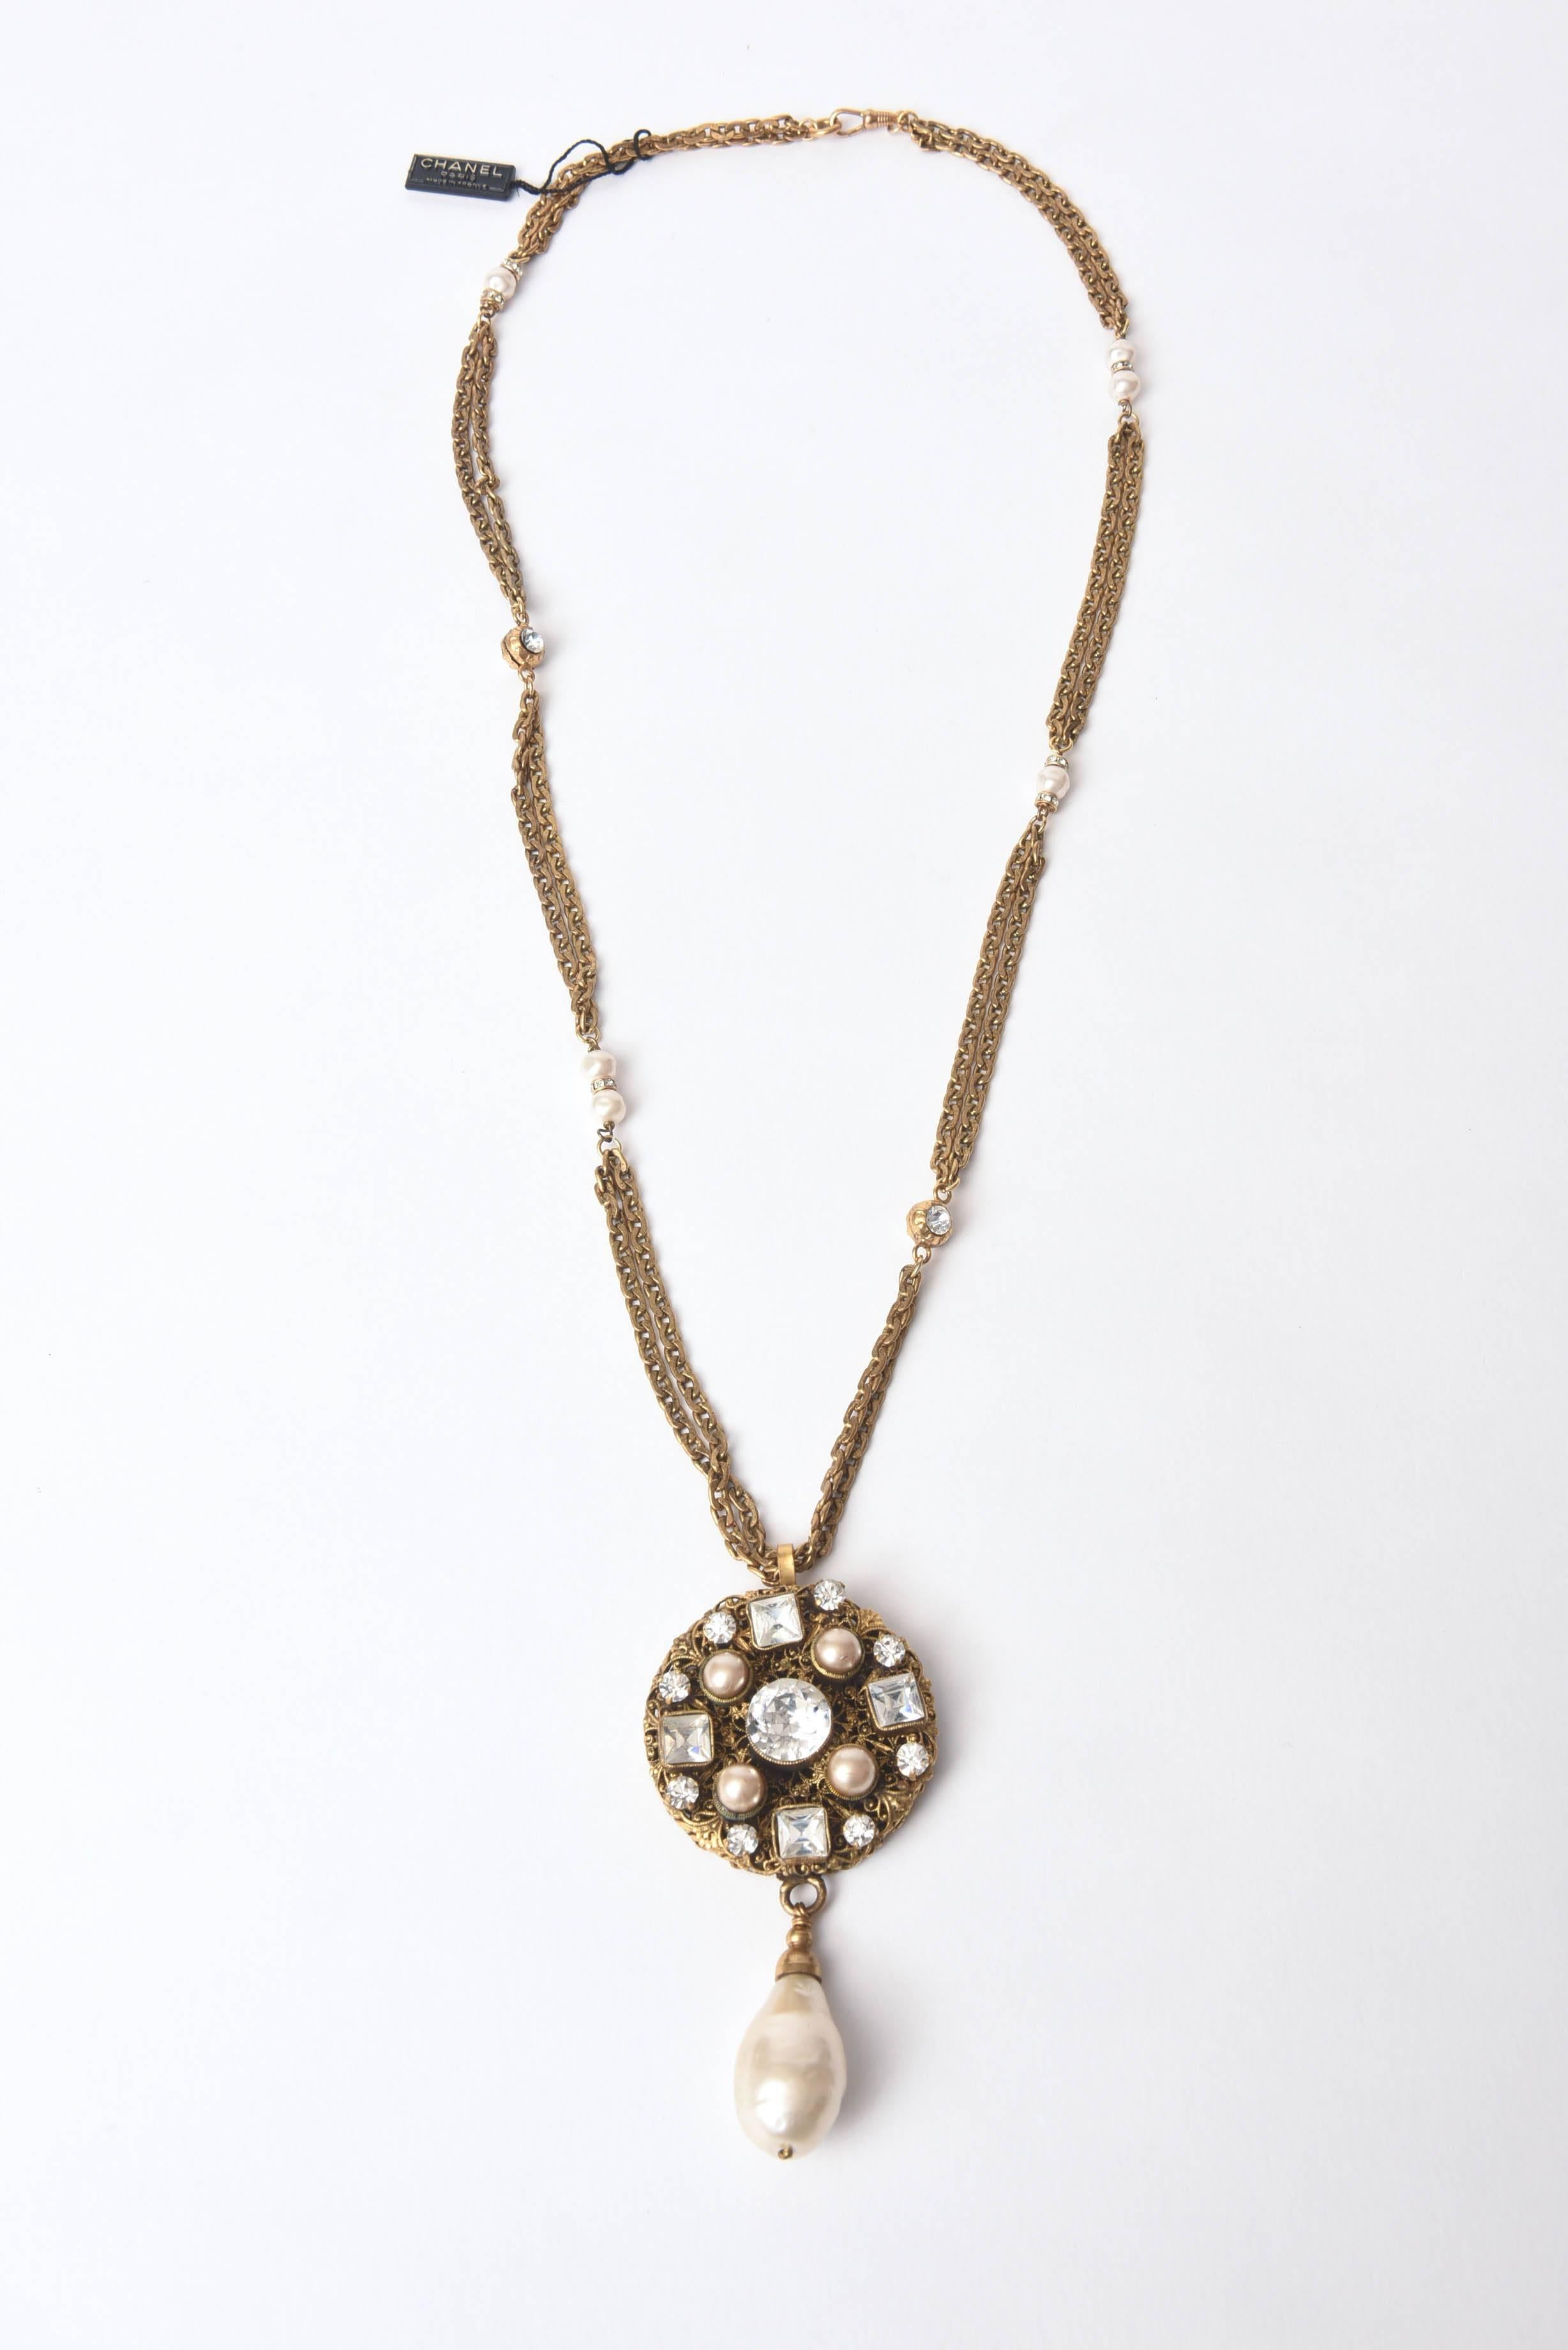 Gold Plate Vintage Chanel Necklace, Faux Pearl, Long and Impressive